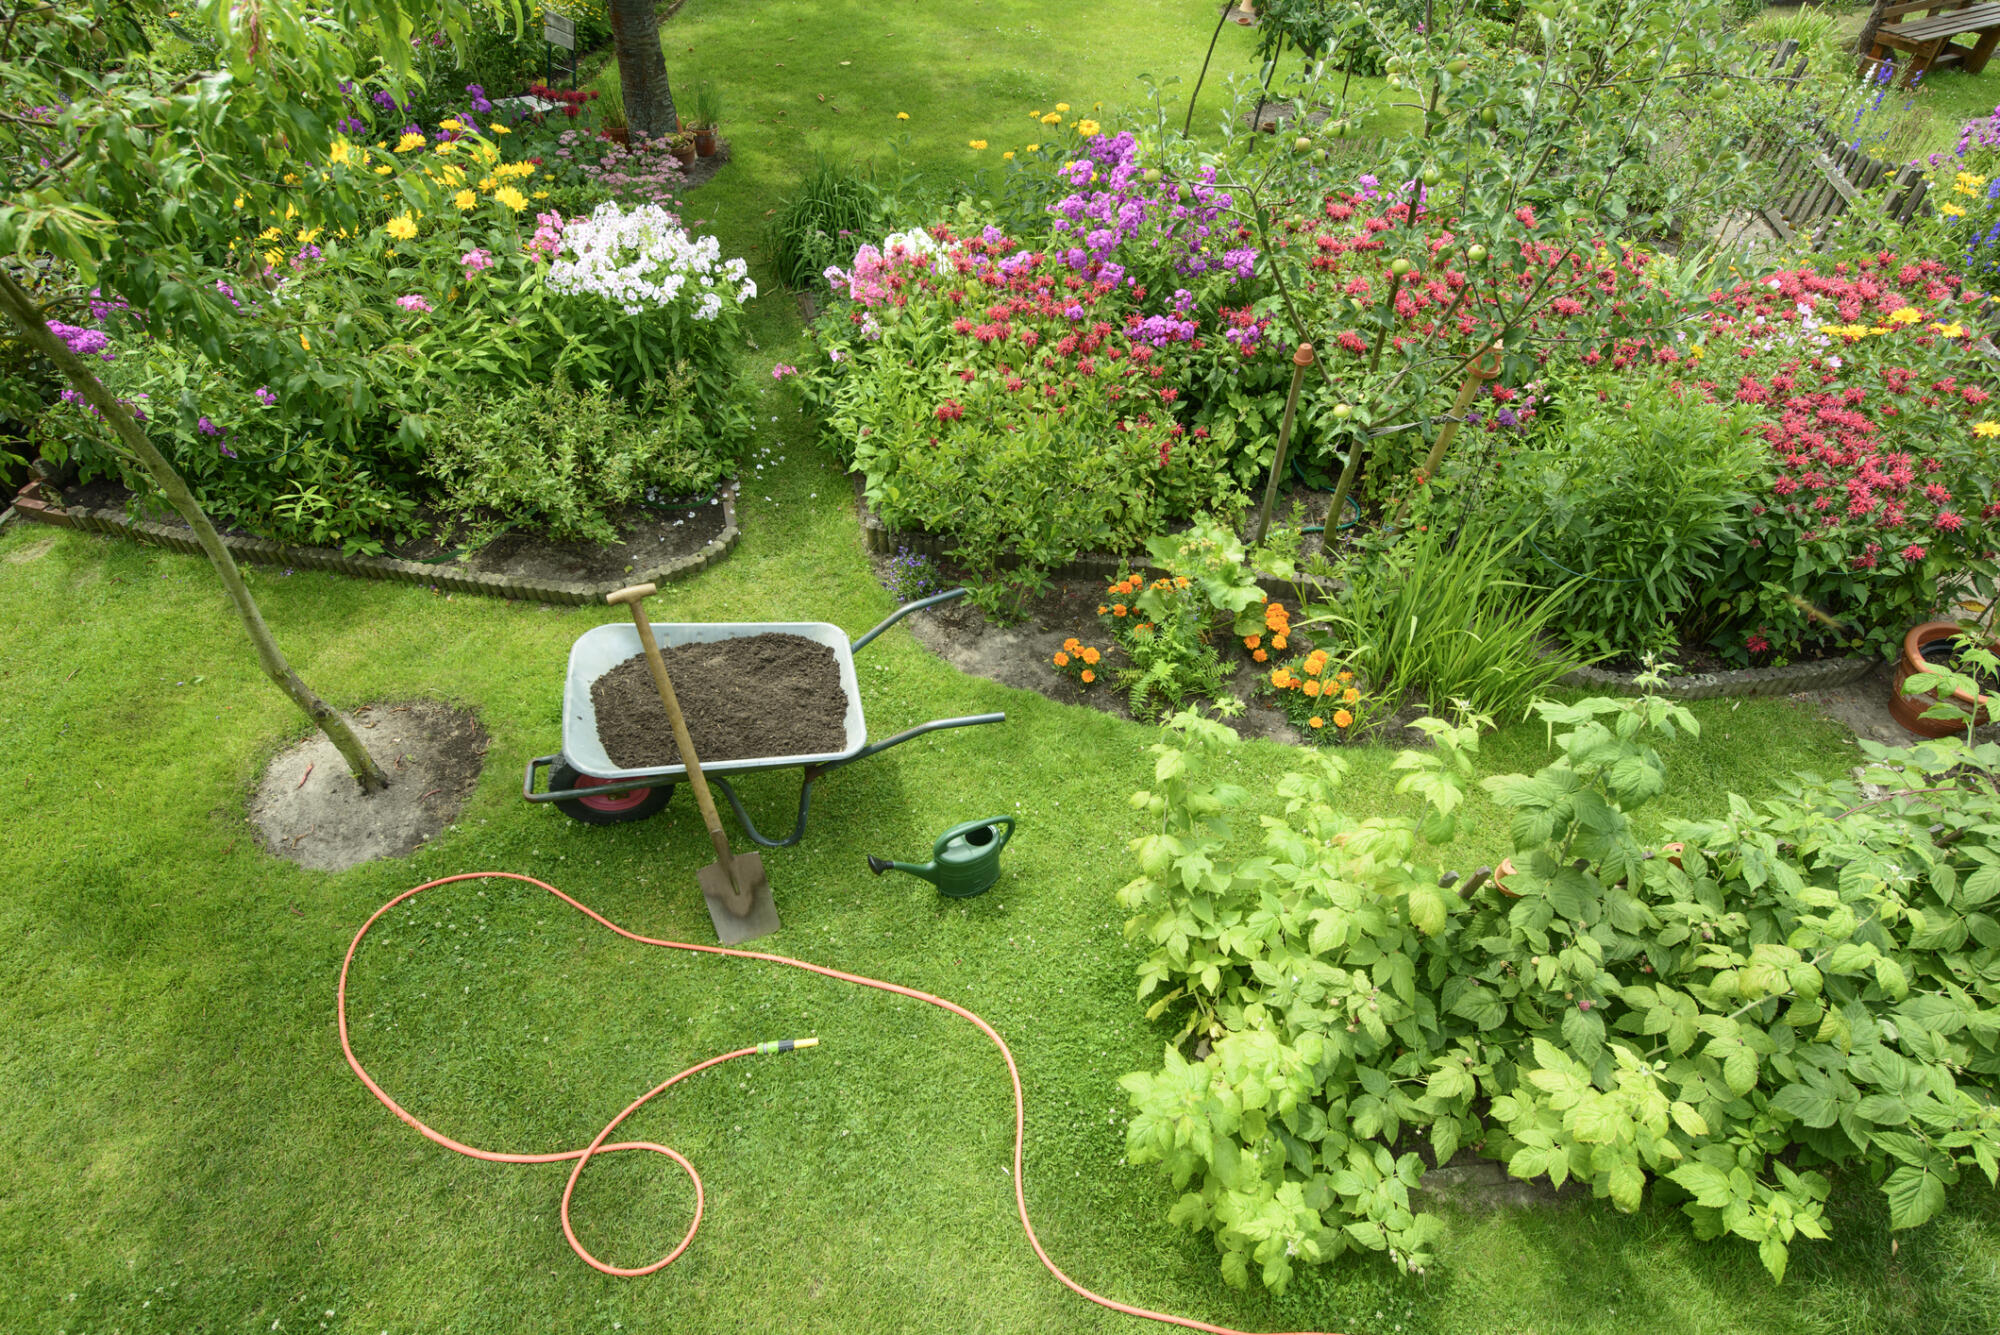 An outdoor space featuring an aerial view of a garden with a wheelbarrow and hose.